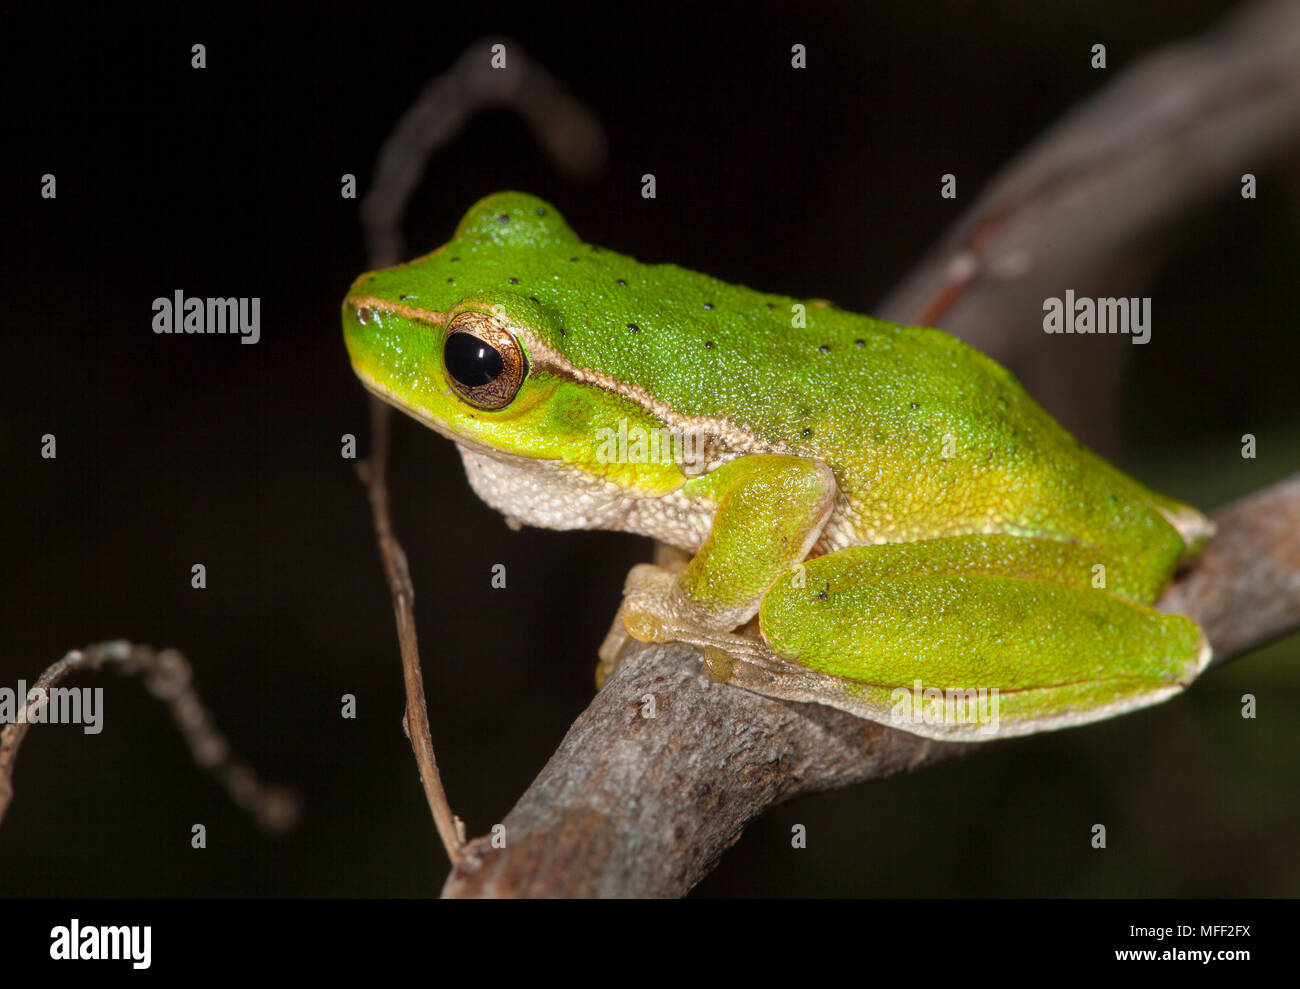 Mountain Stream Frog (Litoria barringtonensis), Fam. Hylidae, dark spots on its back are diagnostic, Myall Lakes National Park, New South Wales, Austr Stock Photo